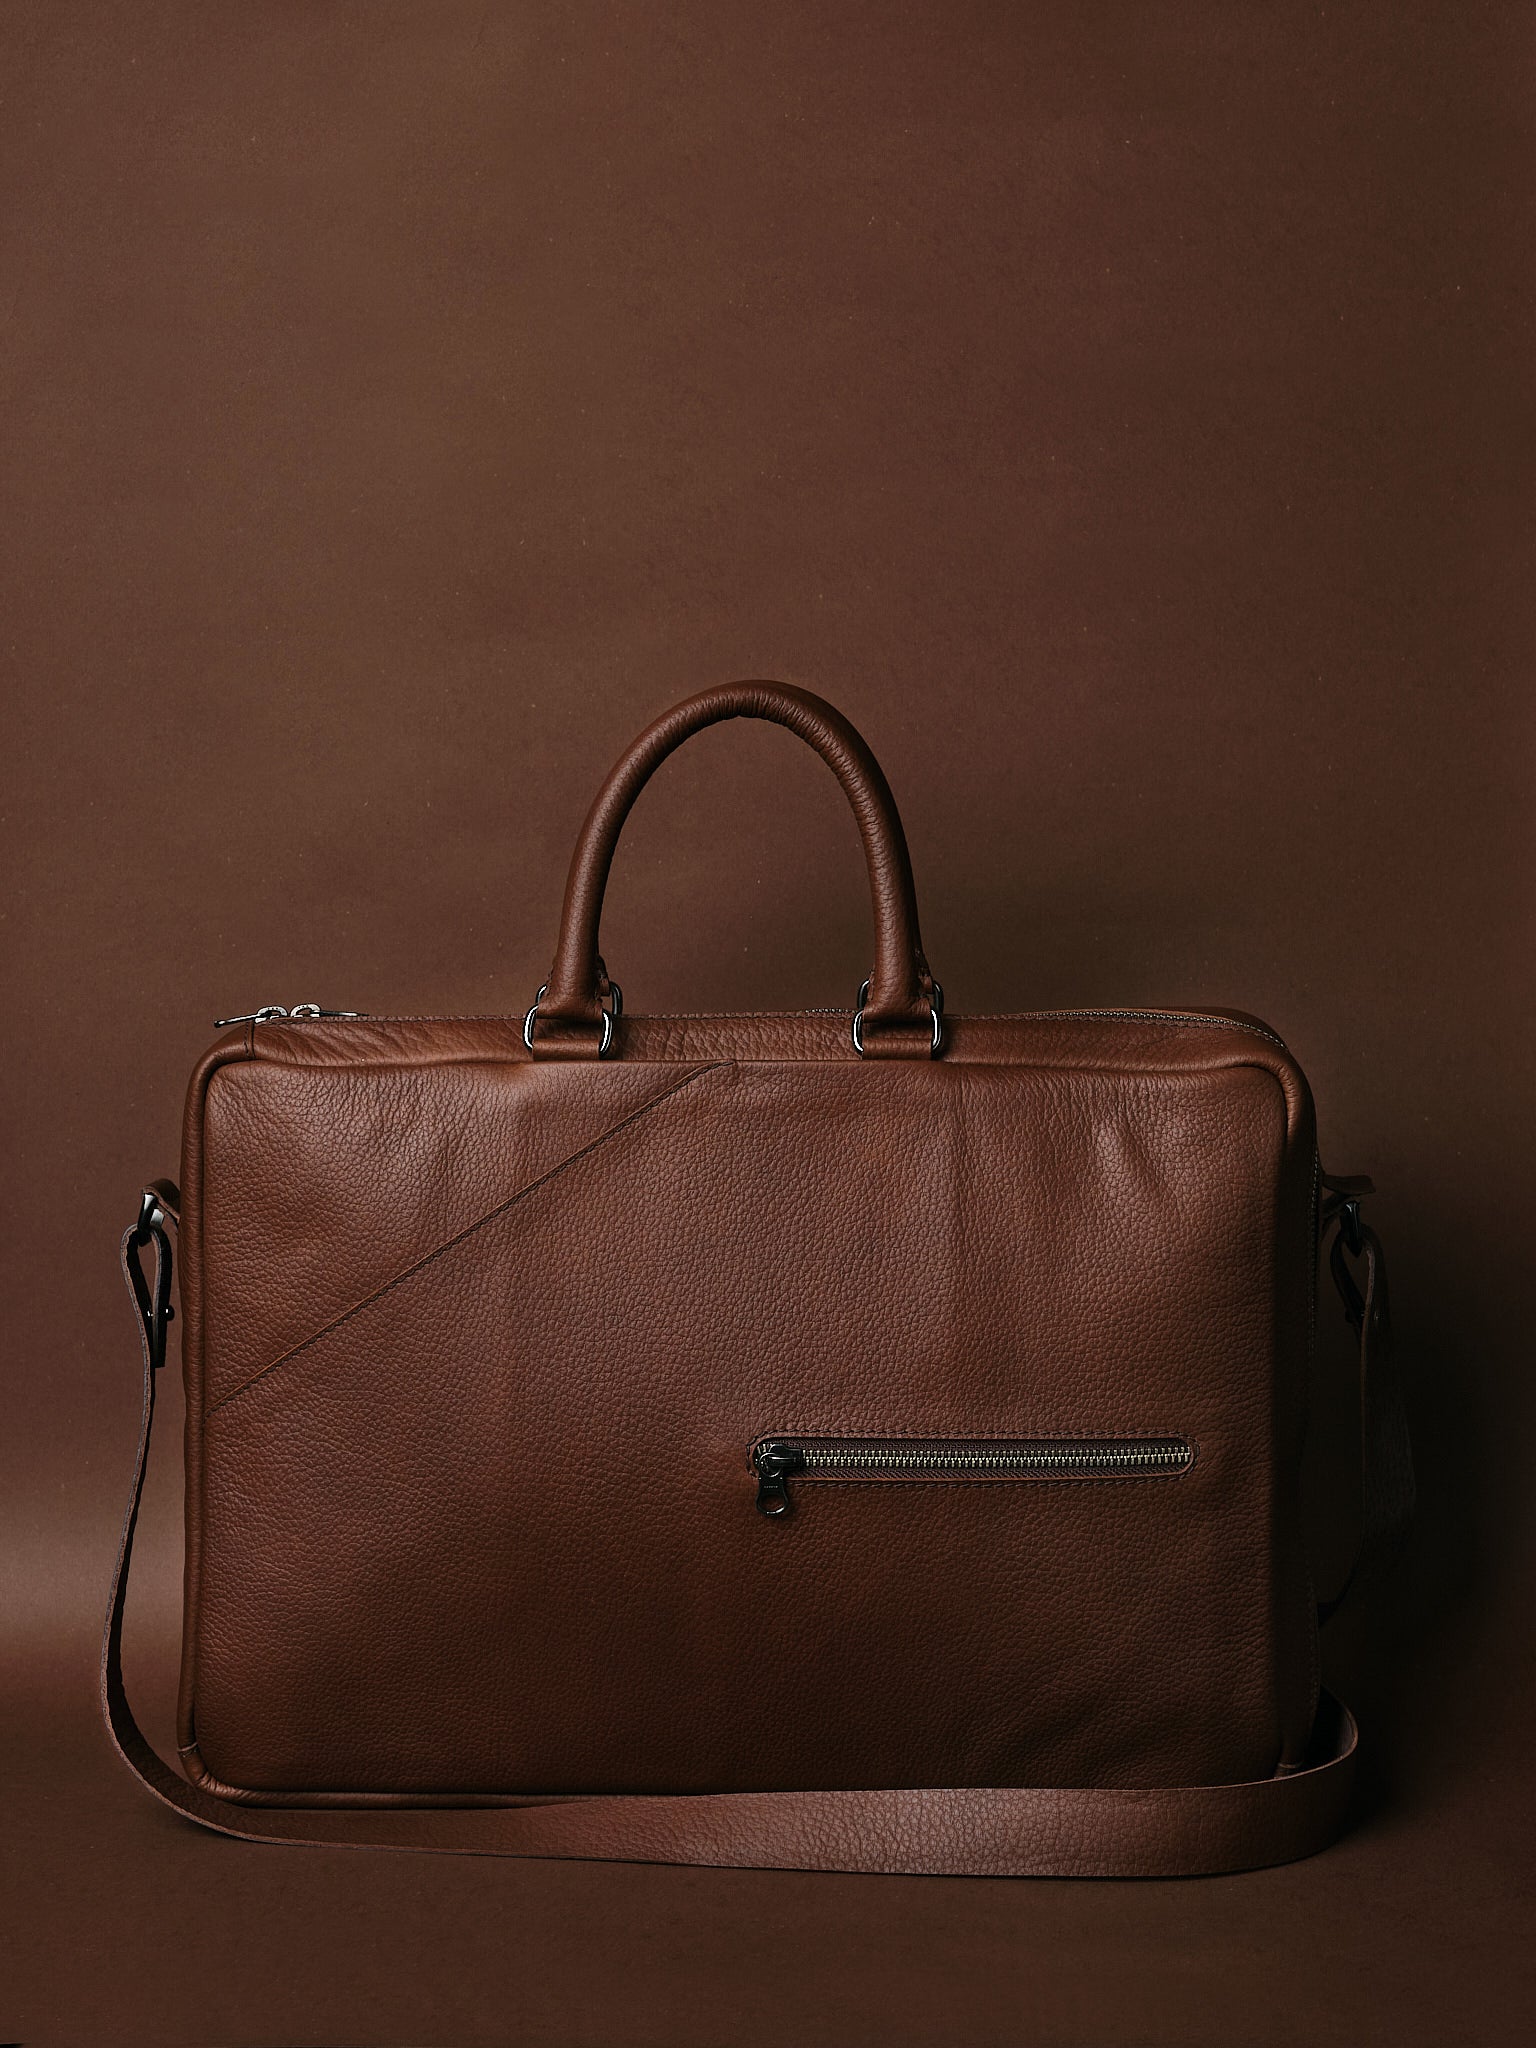 Front zip pocket. Best Convertible Briefcase Backpack Brown by Capra Leather